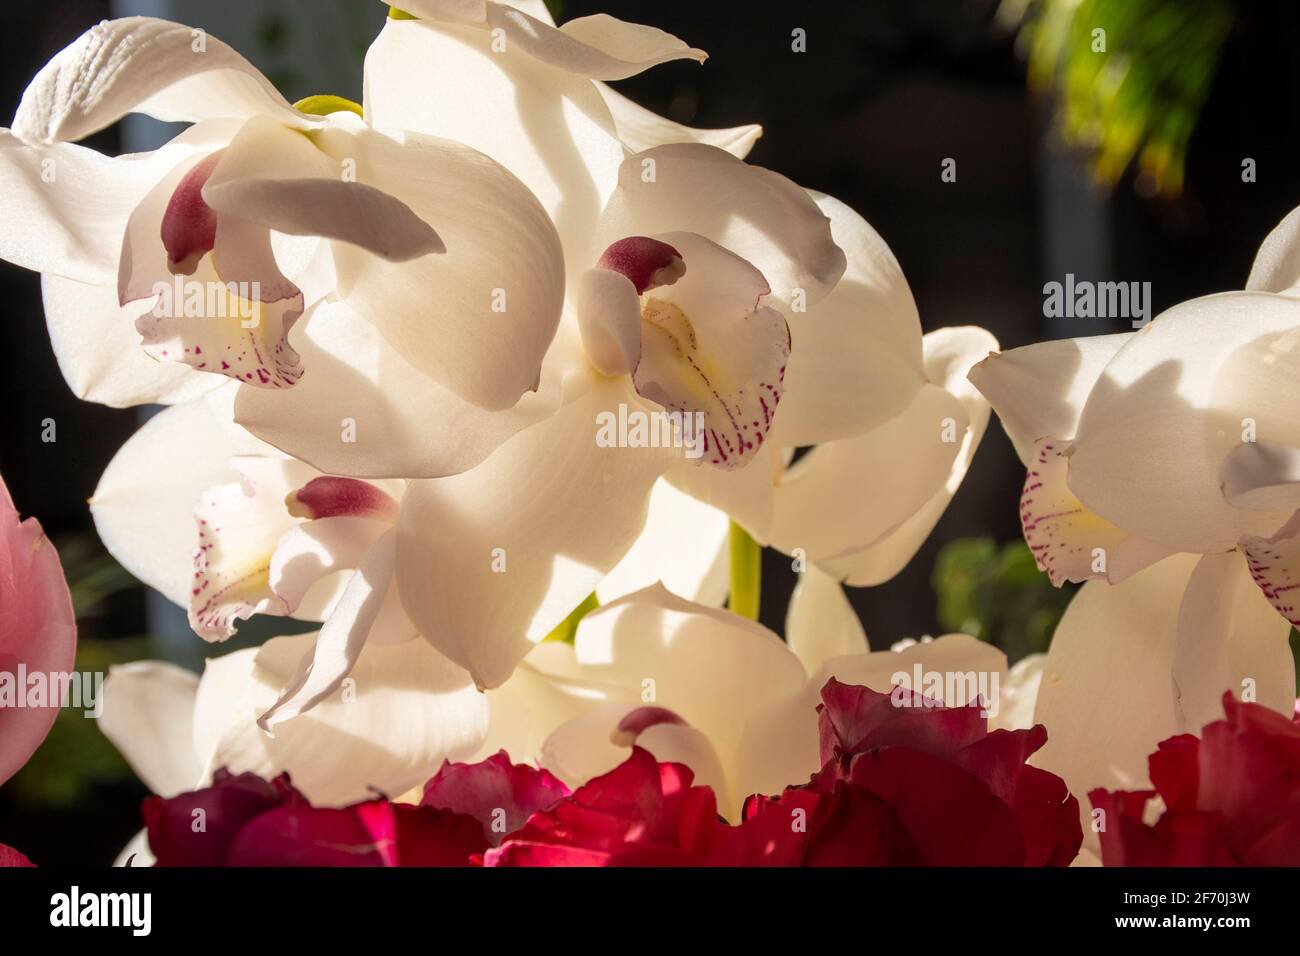 white orchid with surrounded by other orchids and rose petals illuminated by a streak of light Stock Photo